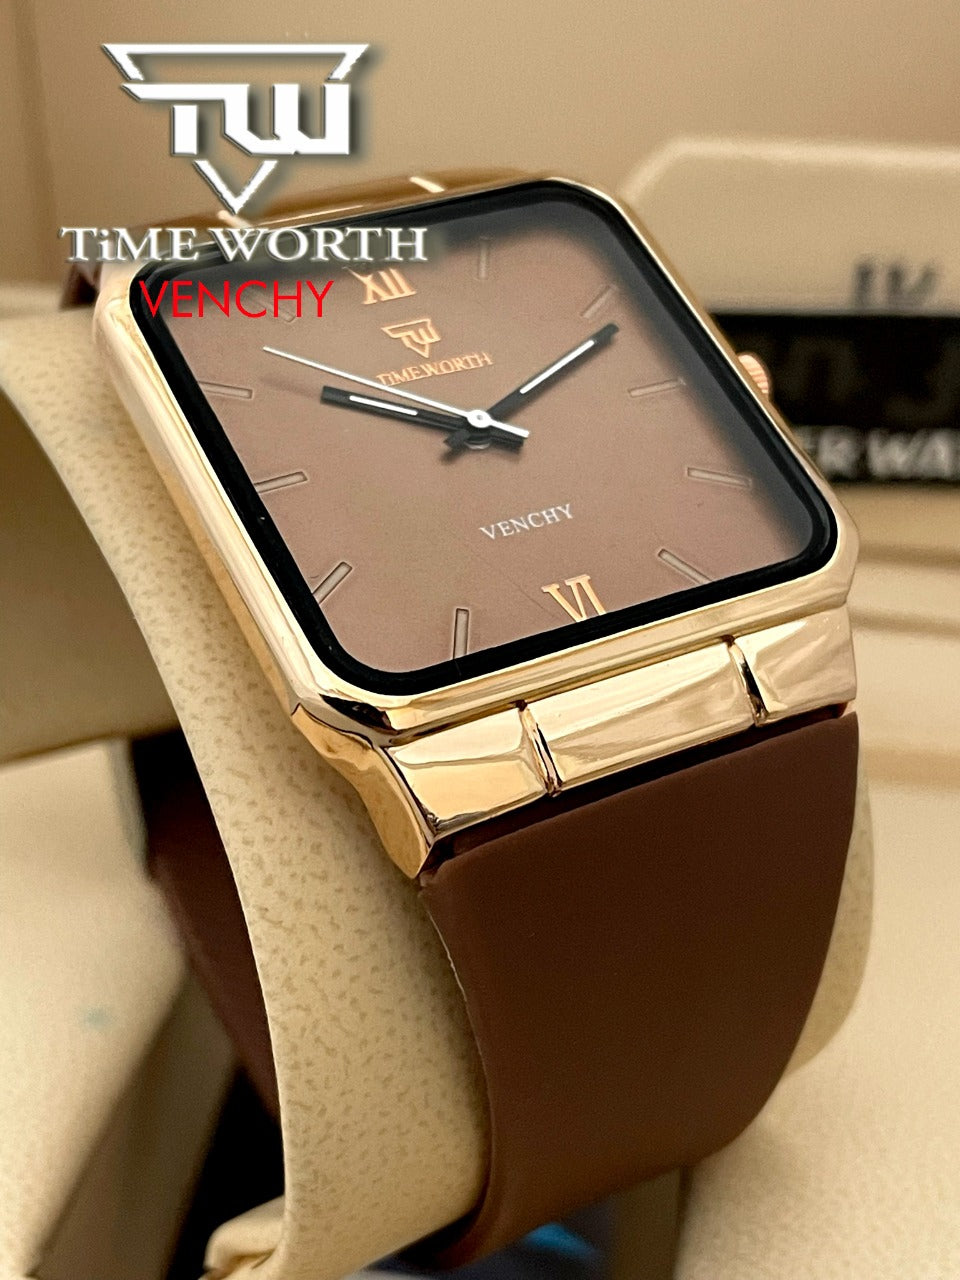 Time worth new & stylish watches for Men RGshop